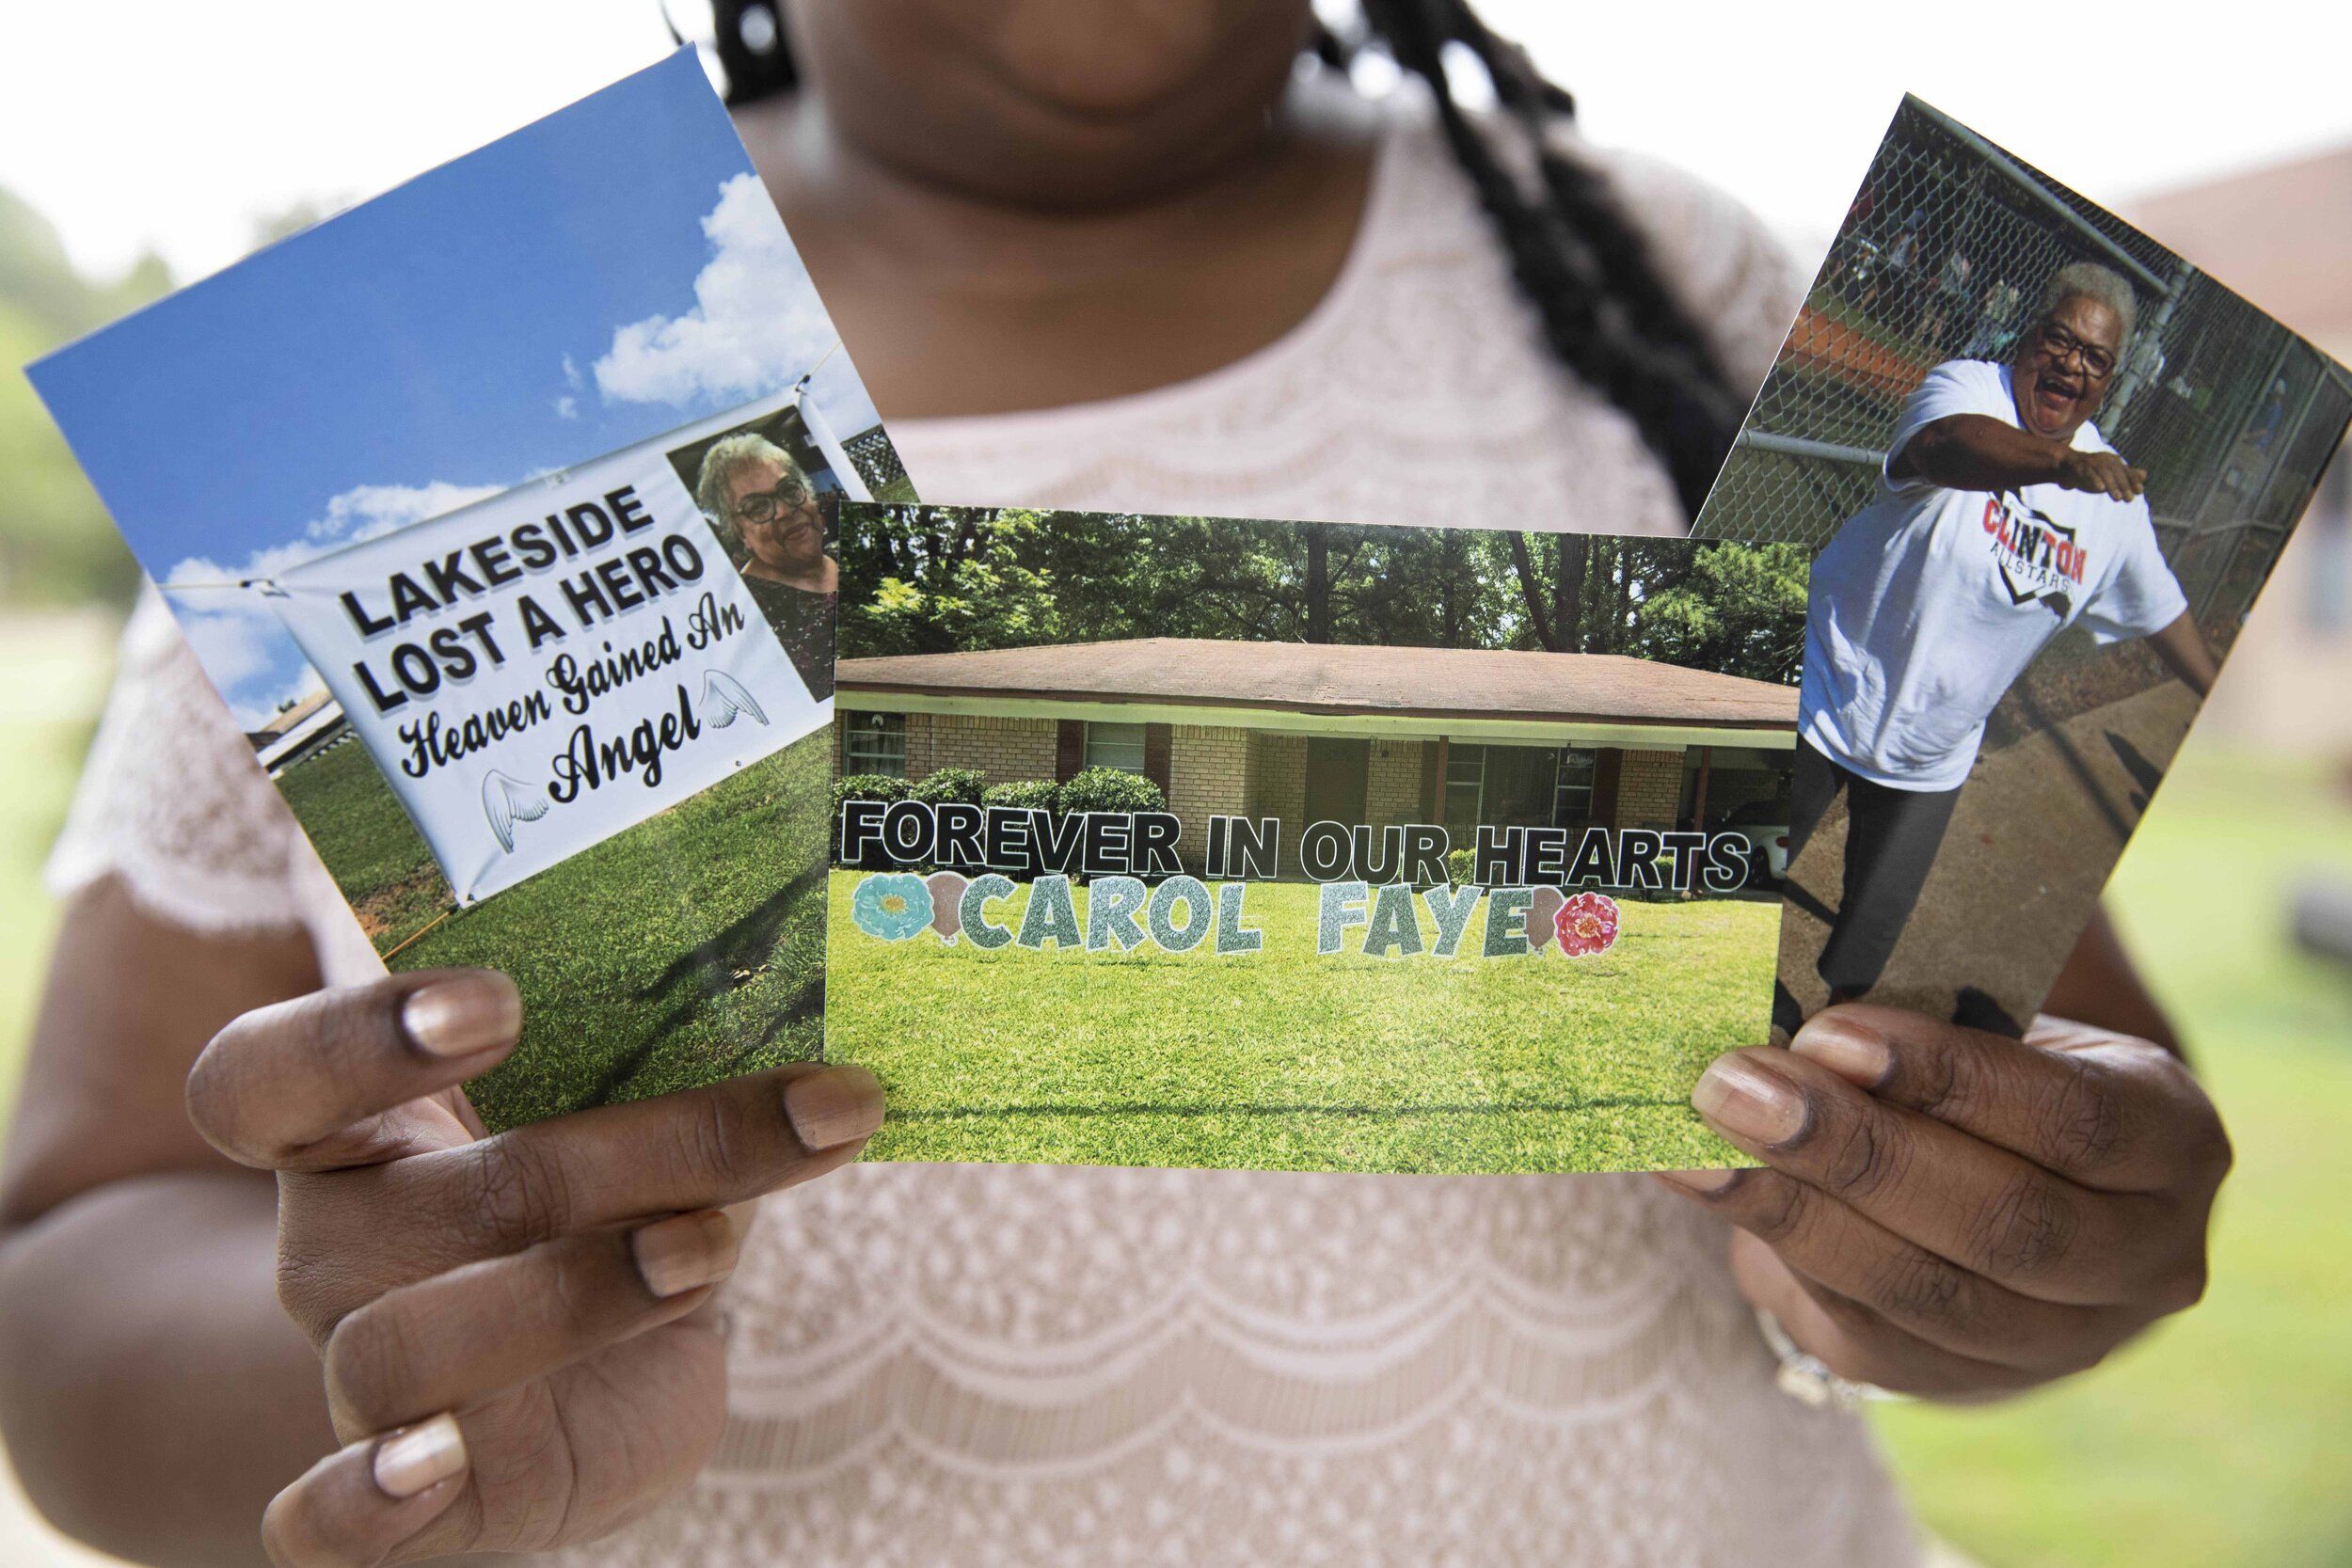 Shenika Jackson holds photos memorializing her late mother, Carol Faye Doby, who died from complications of COVID-19 earlier this year. Friday, September 25, 2020 in Bolton, MS. Image by Sarah Warnock/MCIR. United States, 2020.